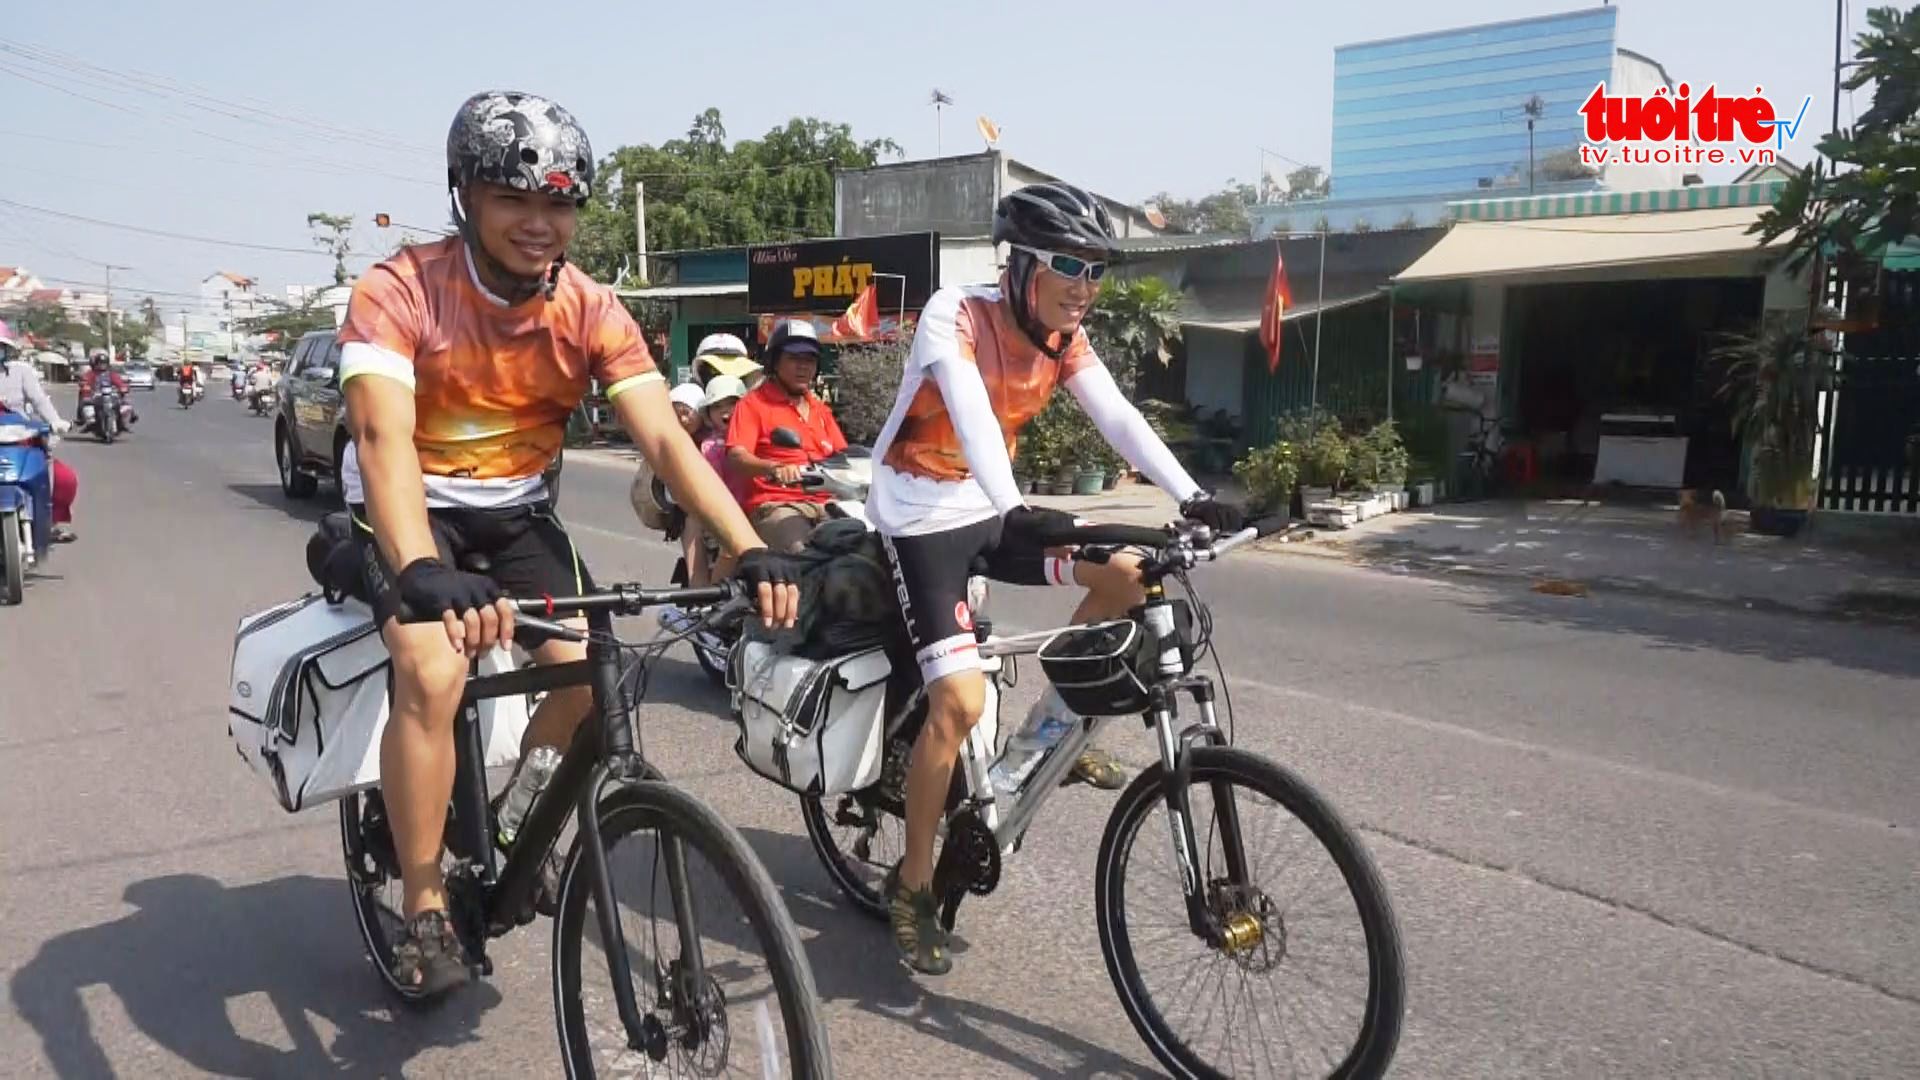 Pair cycle through Vietnam to raise money for critically ill friend